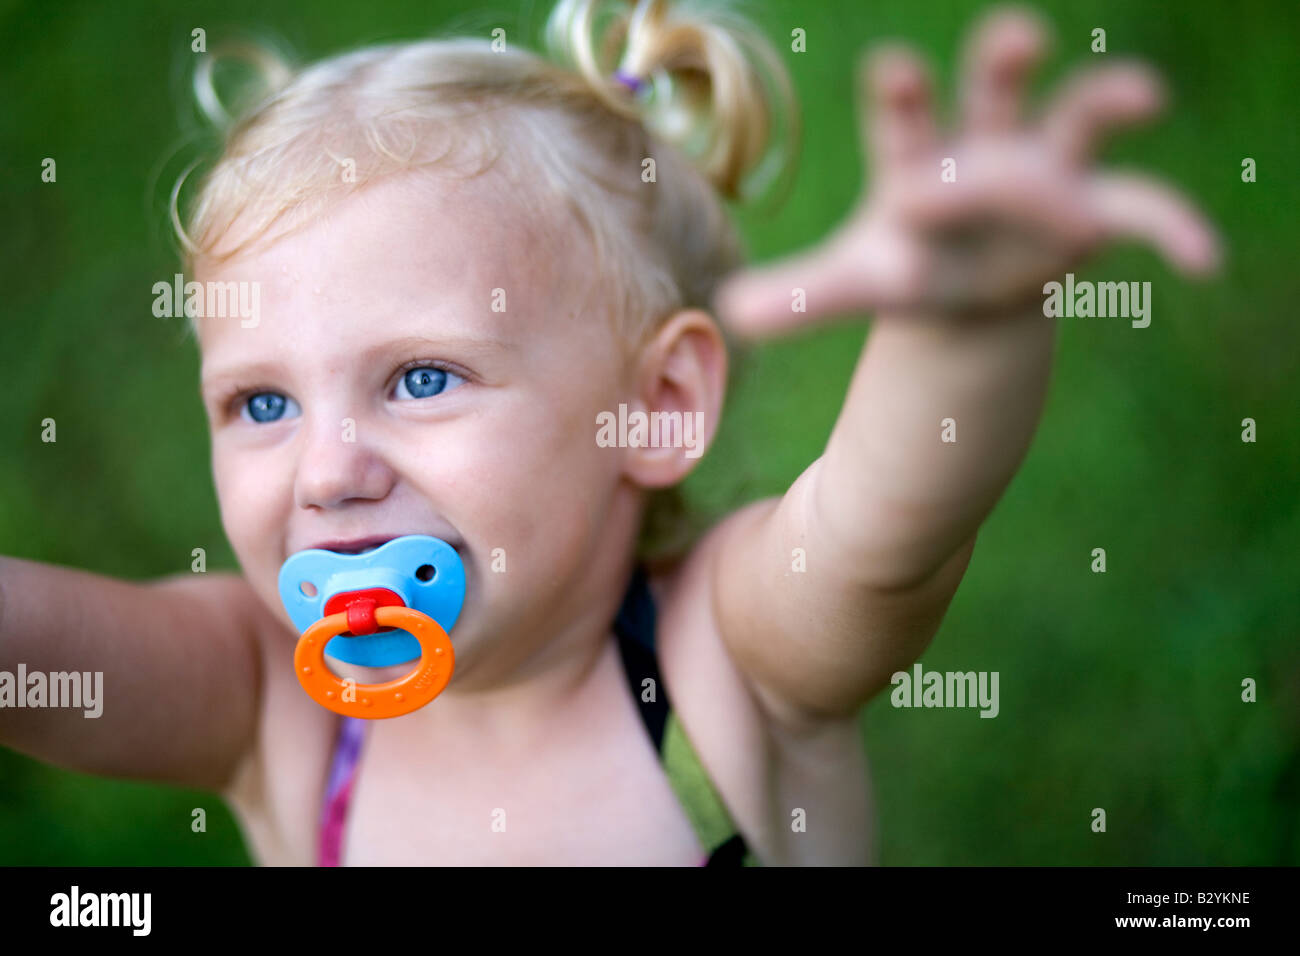 A two-year-old girl with a pacifier and pig tails reaches up while playing outdoors. Stock Photo